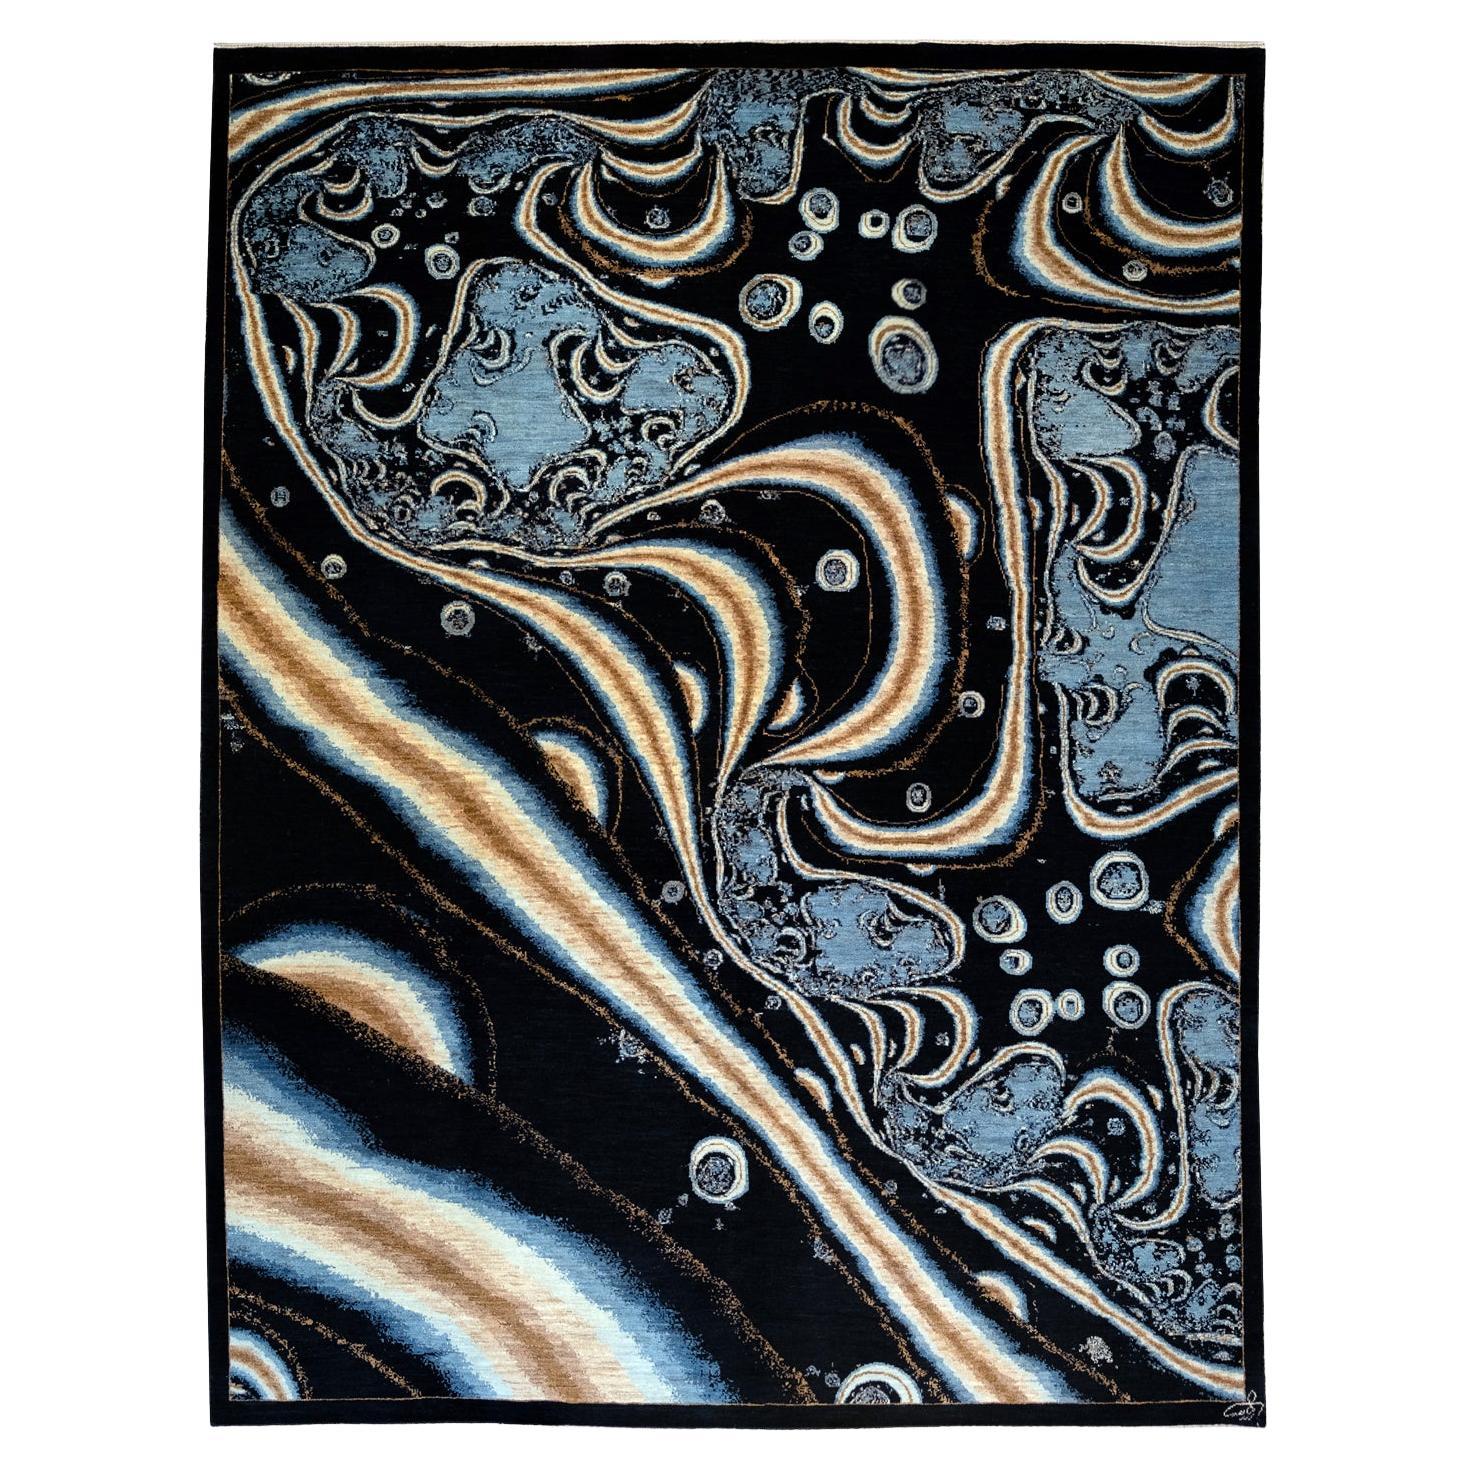 Orley Shabahang’s “Nebula” Contemporary Carpet in Indigo, Gold, and Cream For Sale